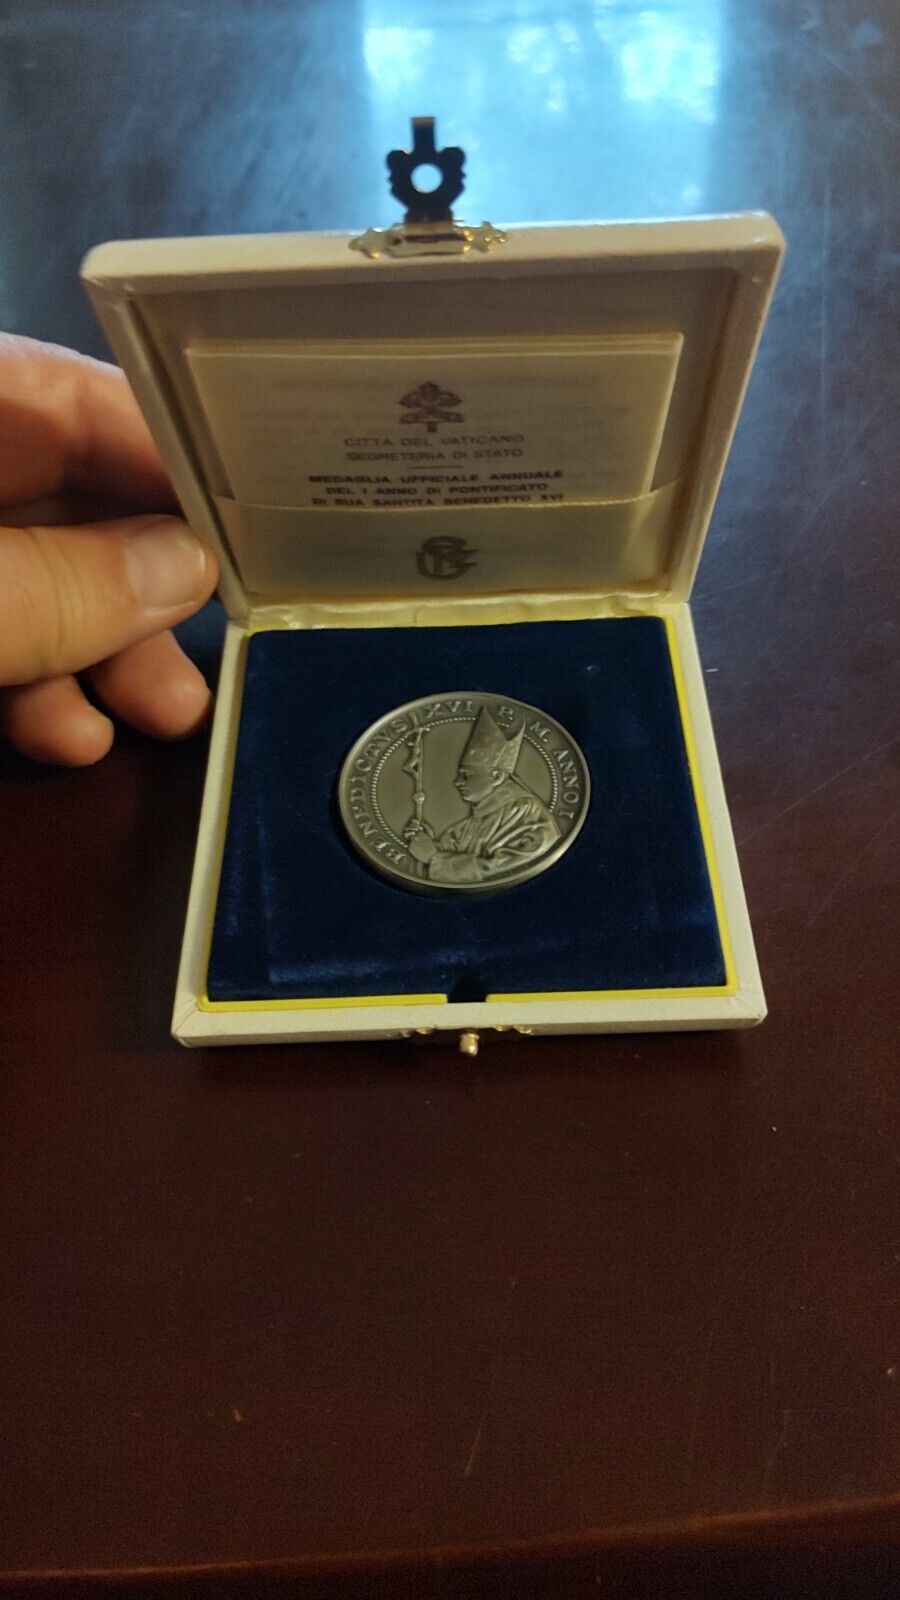 NIB Sterling 2005 Vatican City Medal Saint Benedetto XVI COA 40g Certified Real